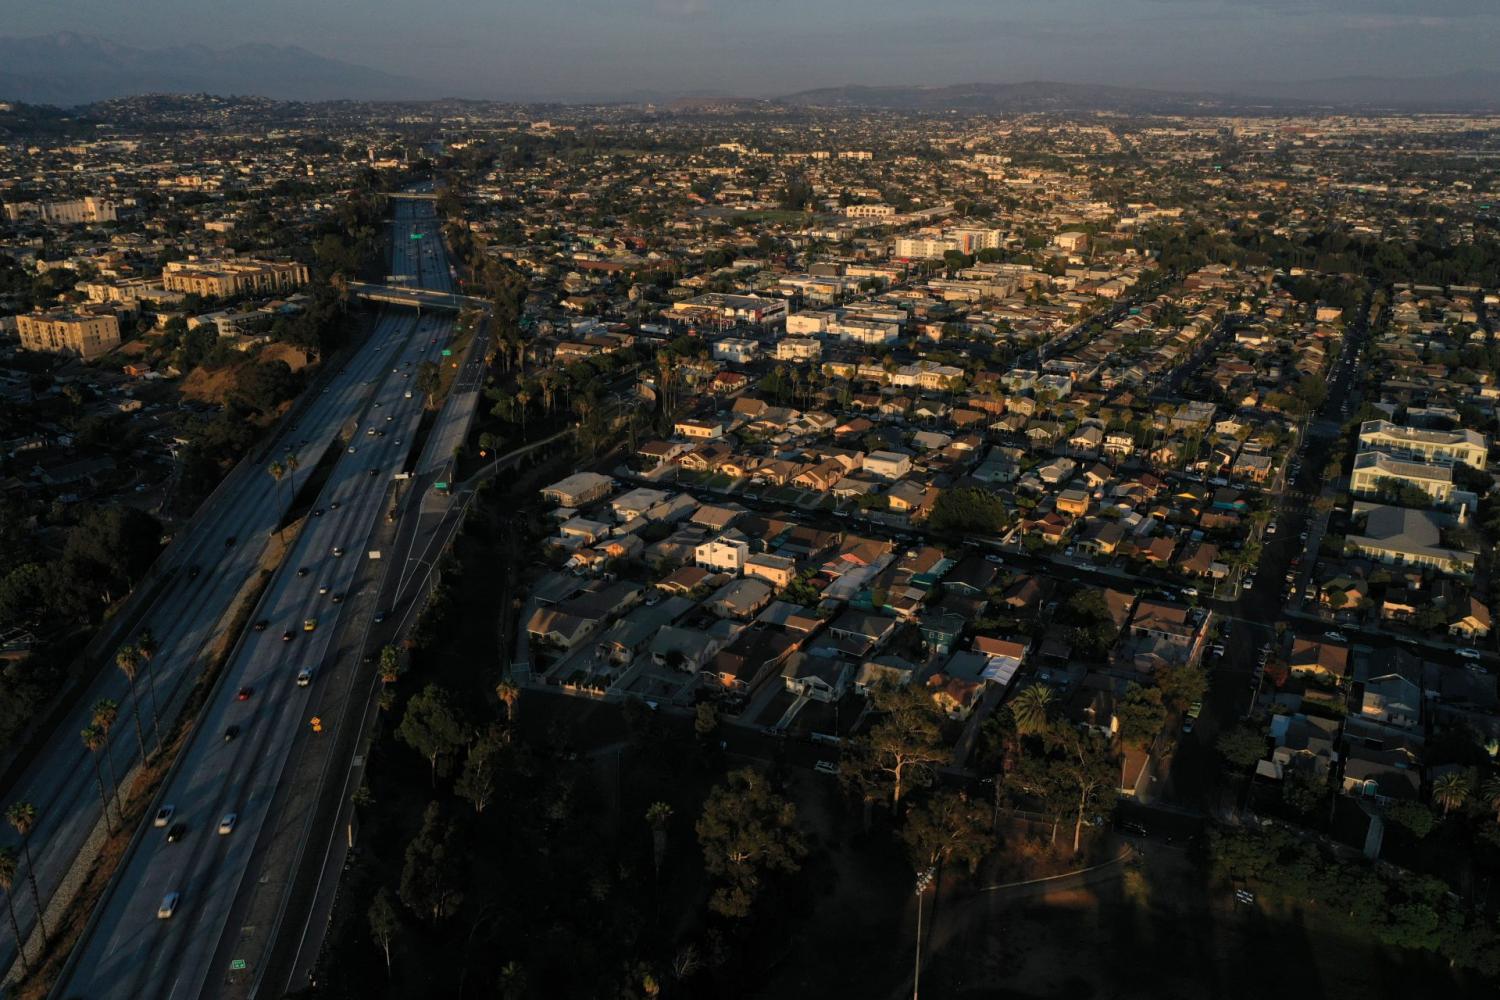 An aerial view shows vehicle traffic on Interstate 5 (I-5) and homes in residential areas in Los Angeles, California, U.S. August 10, 2021. Picture taken with a drone. REUTERS/Bing Guan